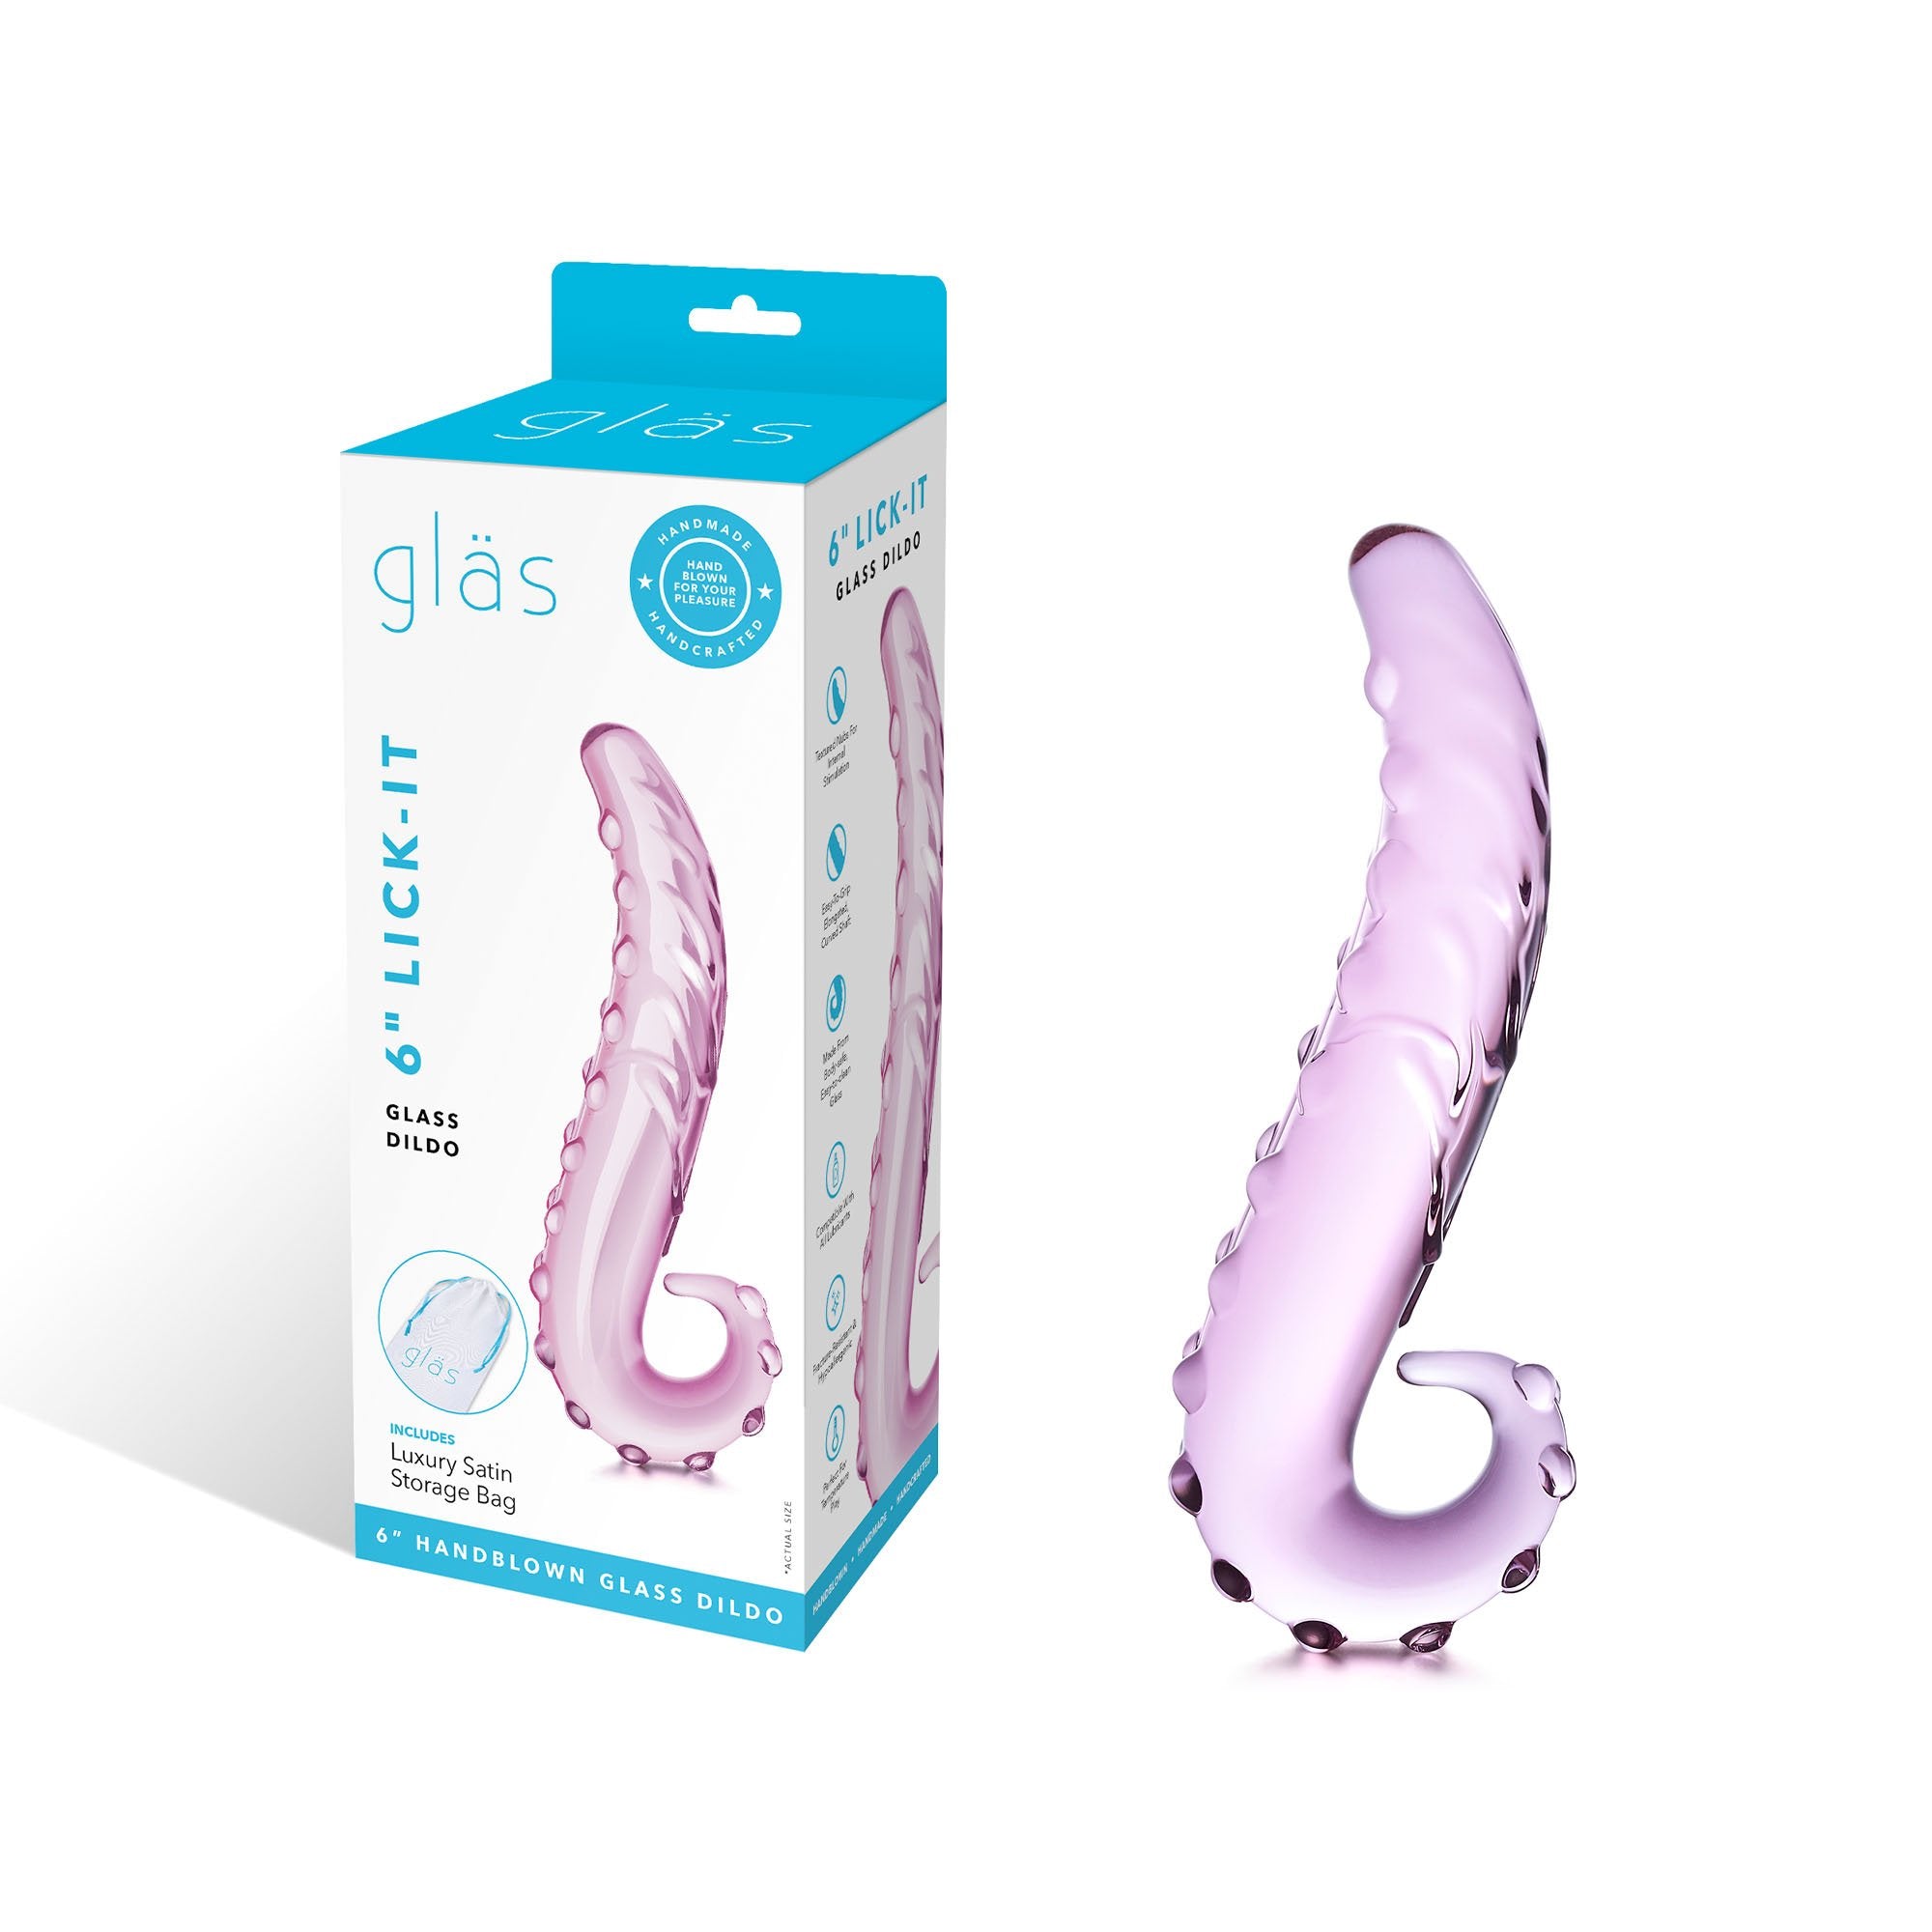 Packaging of the 6 inch Lick-it Glass Dildo